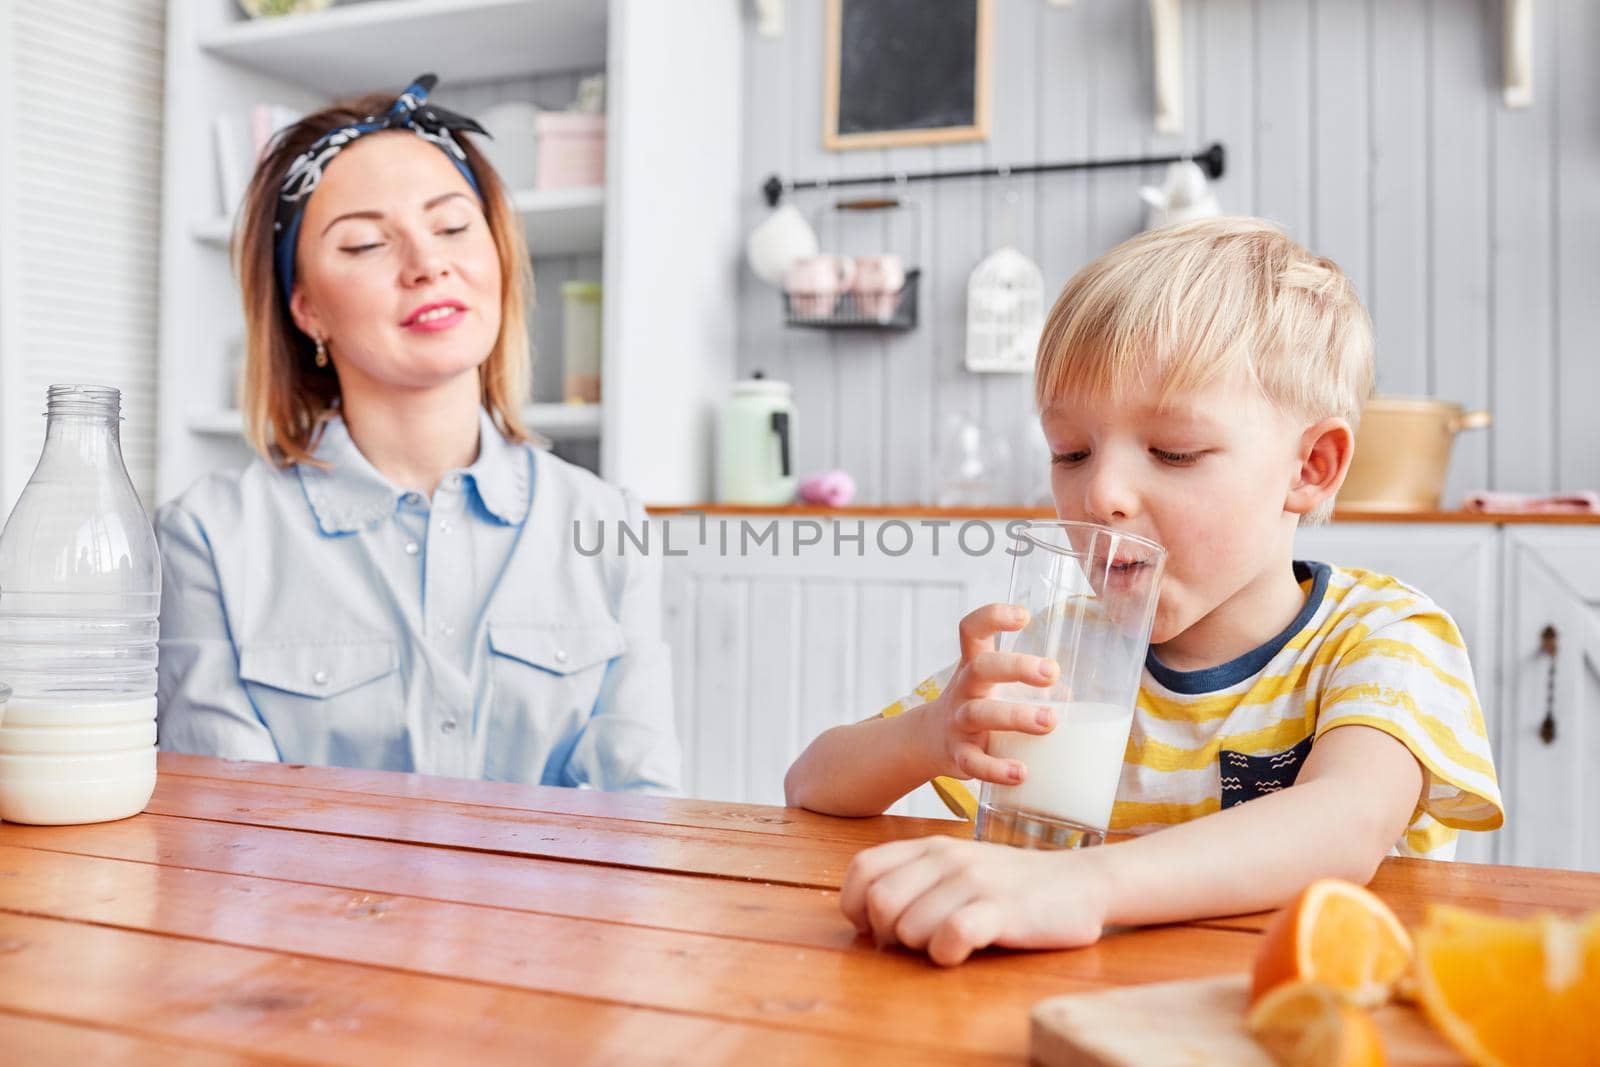 Little boy are smiling while having a breakfast in kitchen. Mom is pouring milk into glass by Malkovkosta